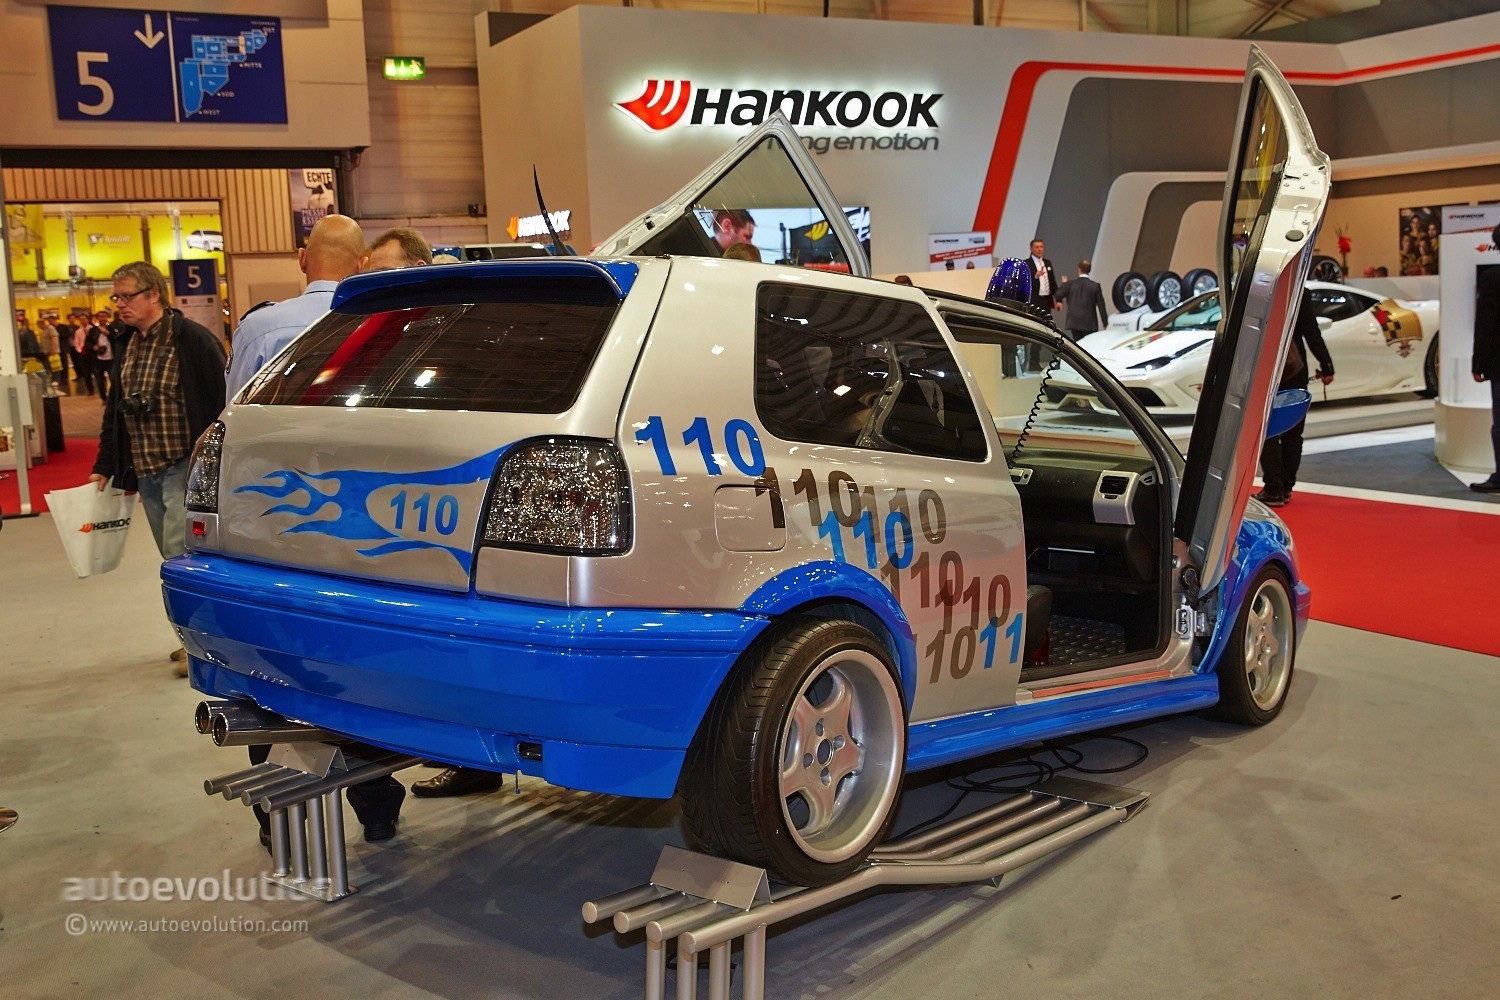 Tune It! Safe! Campaign Brought Six Cars to the Essen Motor Show